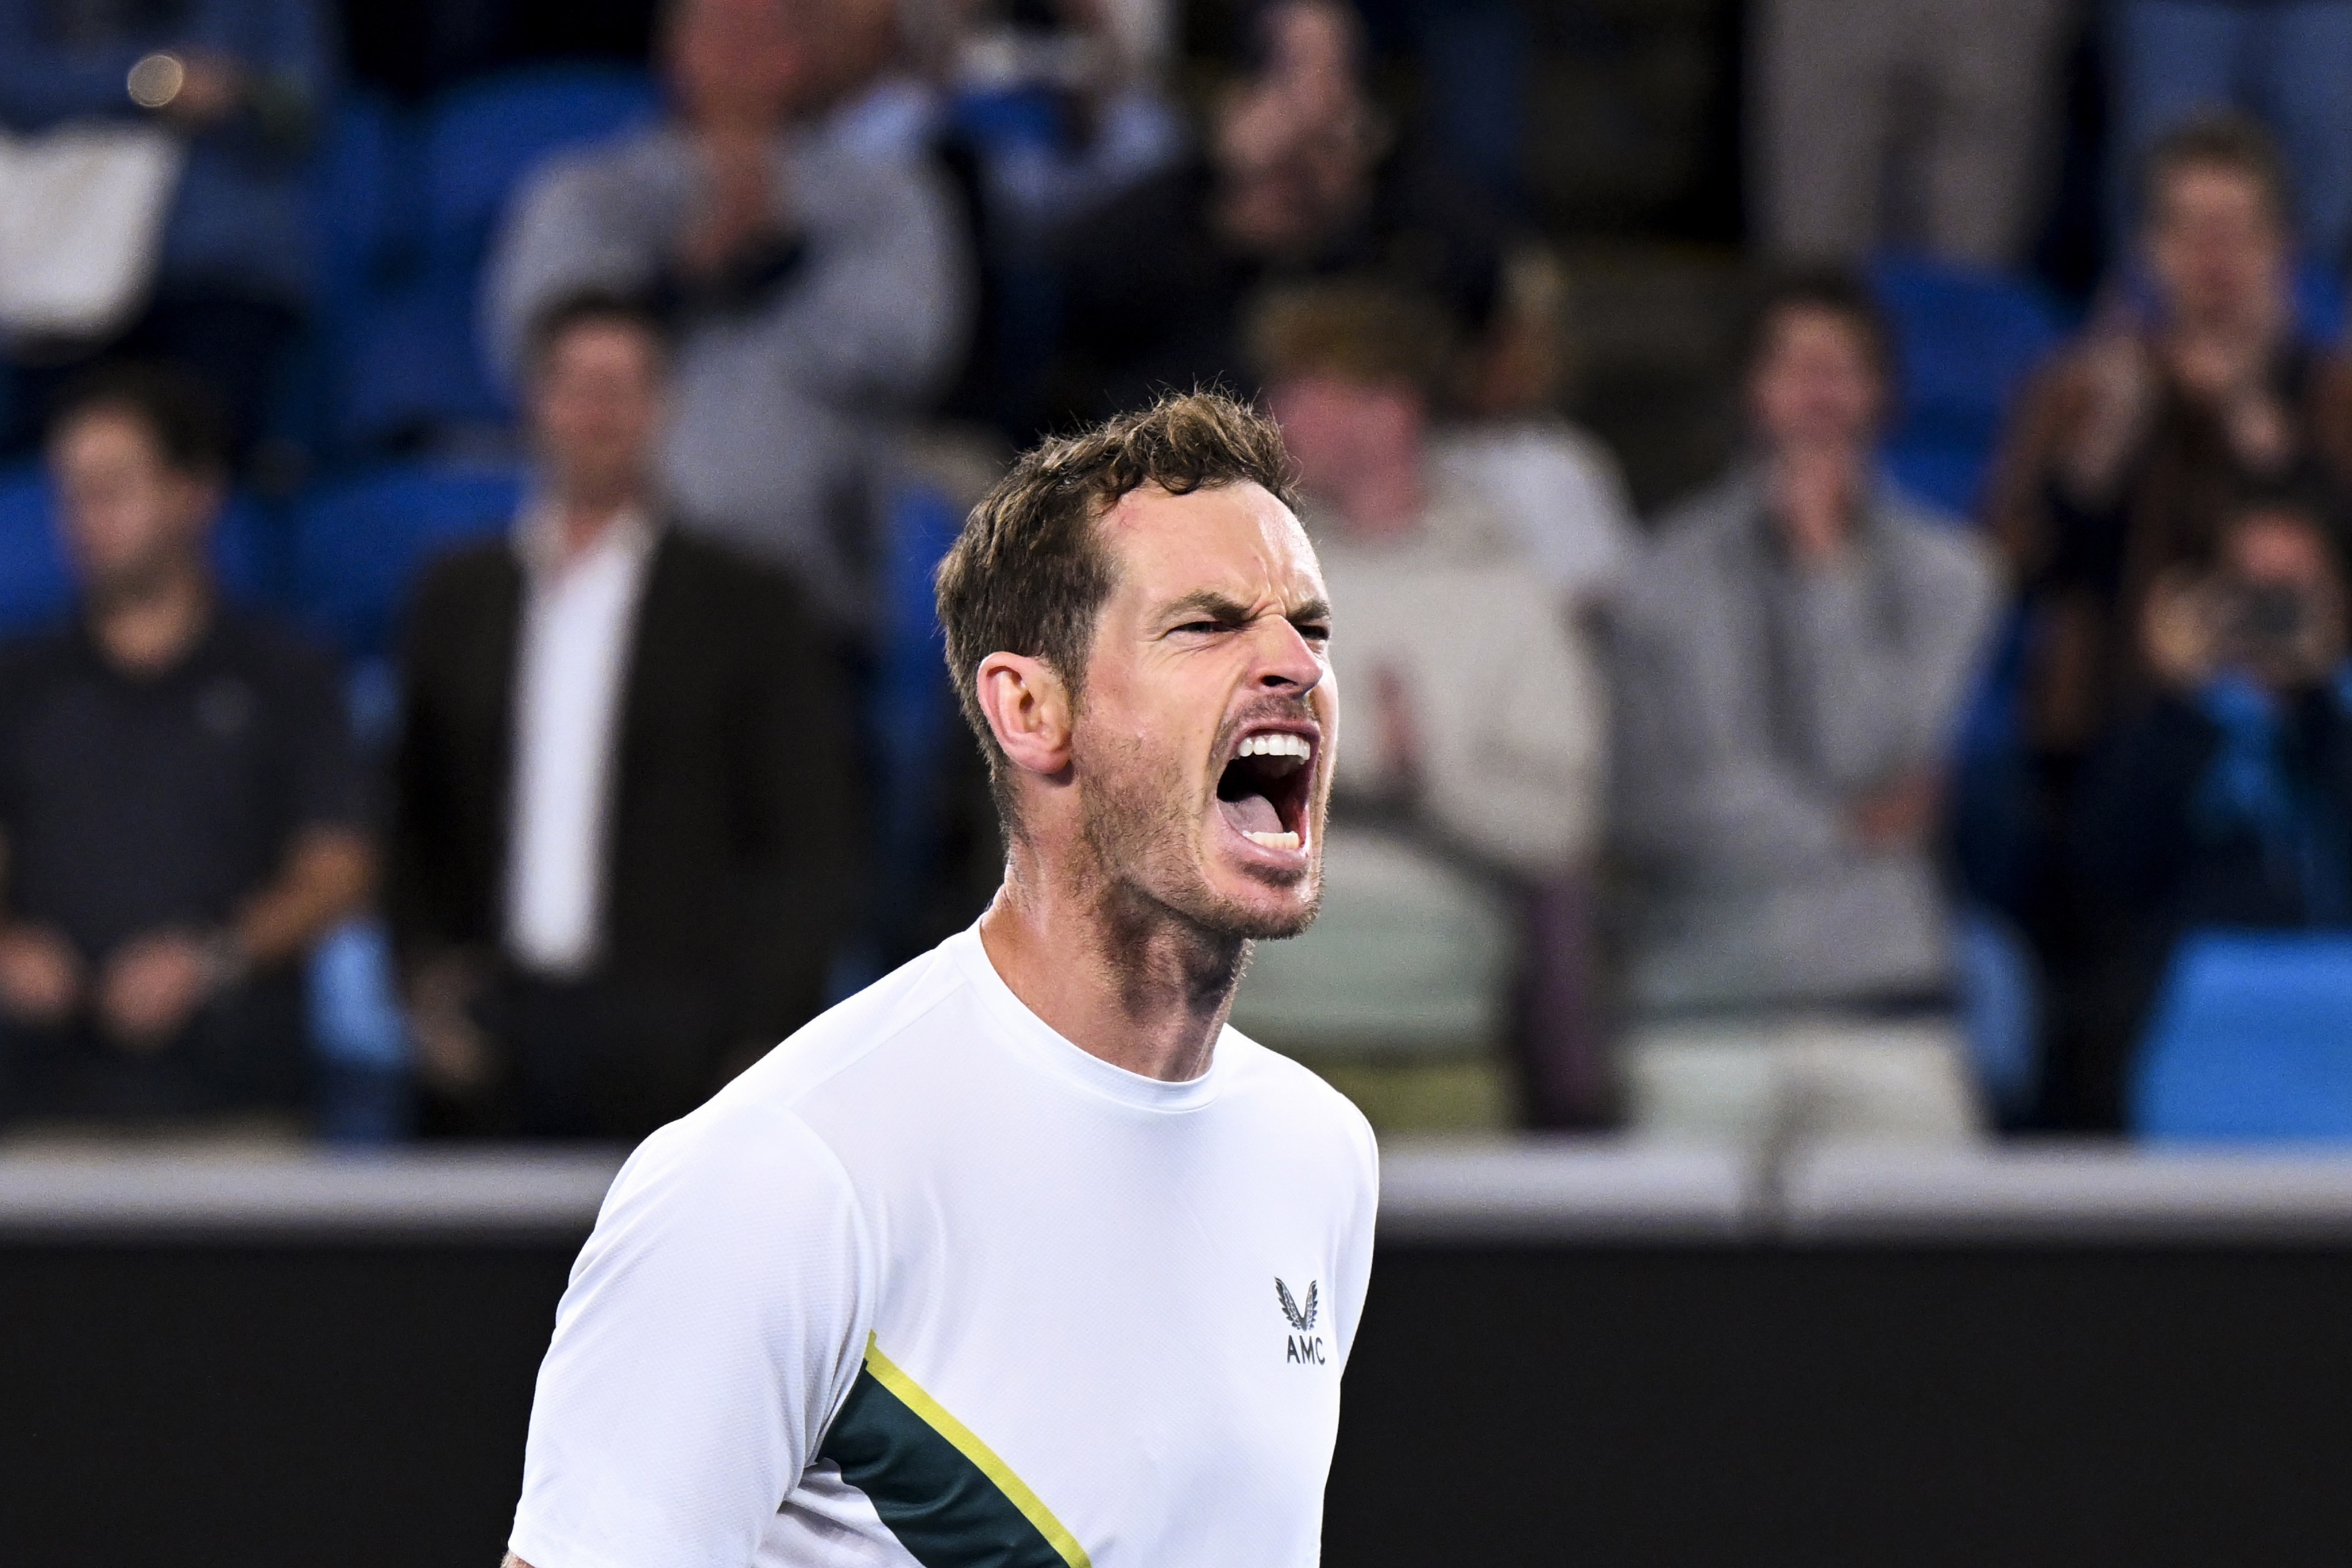 Andy Murray celebrates after winning his second round match against Thanasi Kokkinakis at the 2023 Australian Open. Photo: EPA-EFE